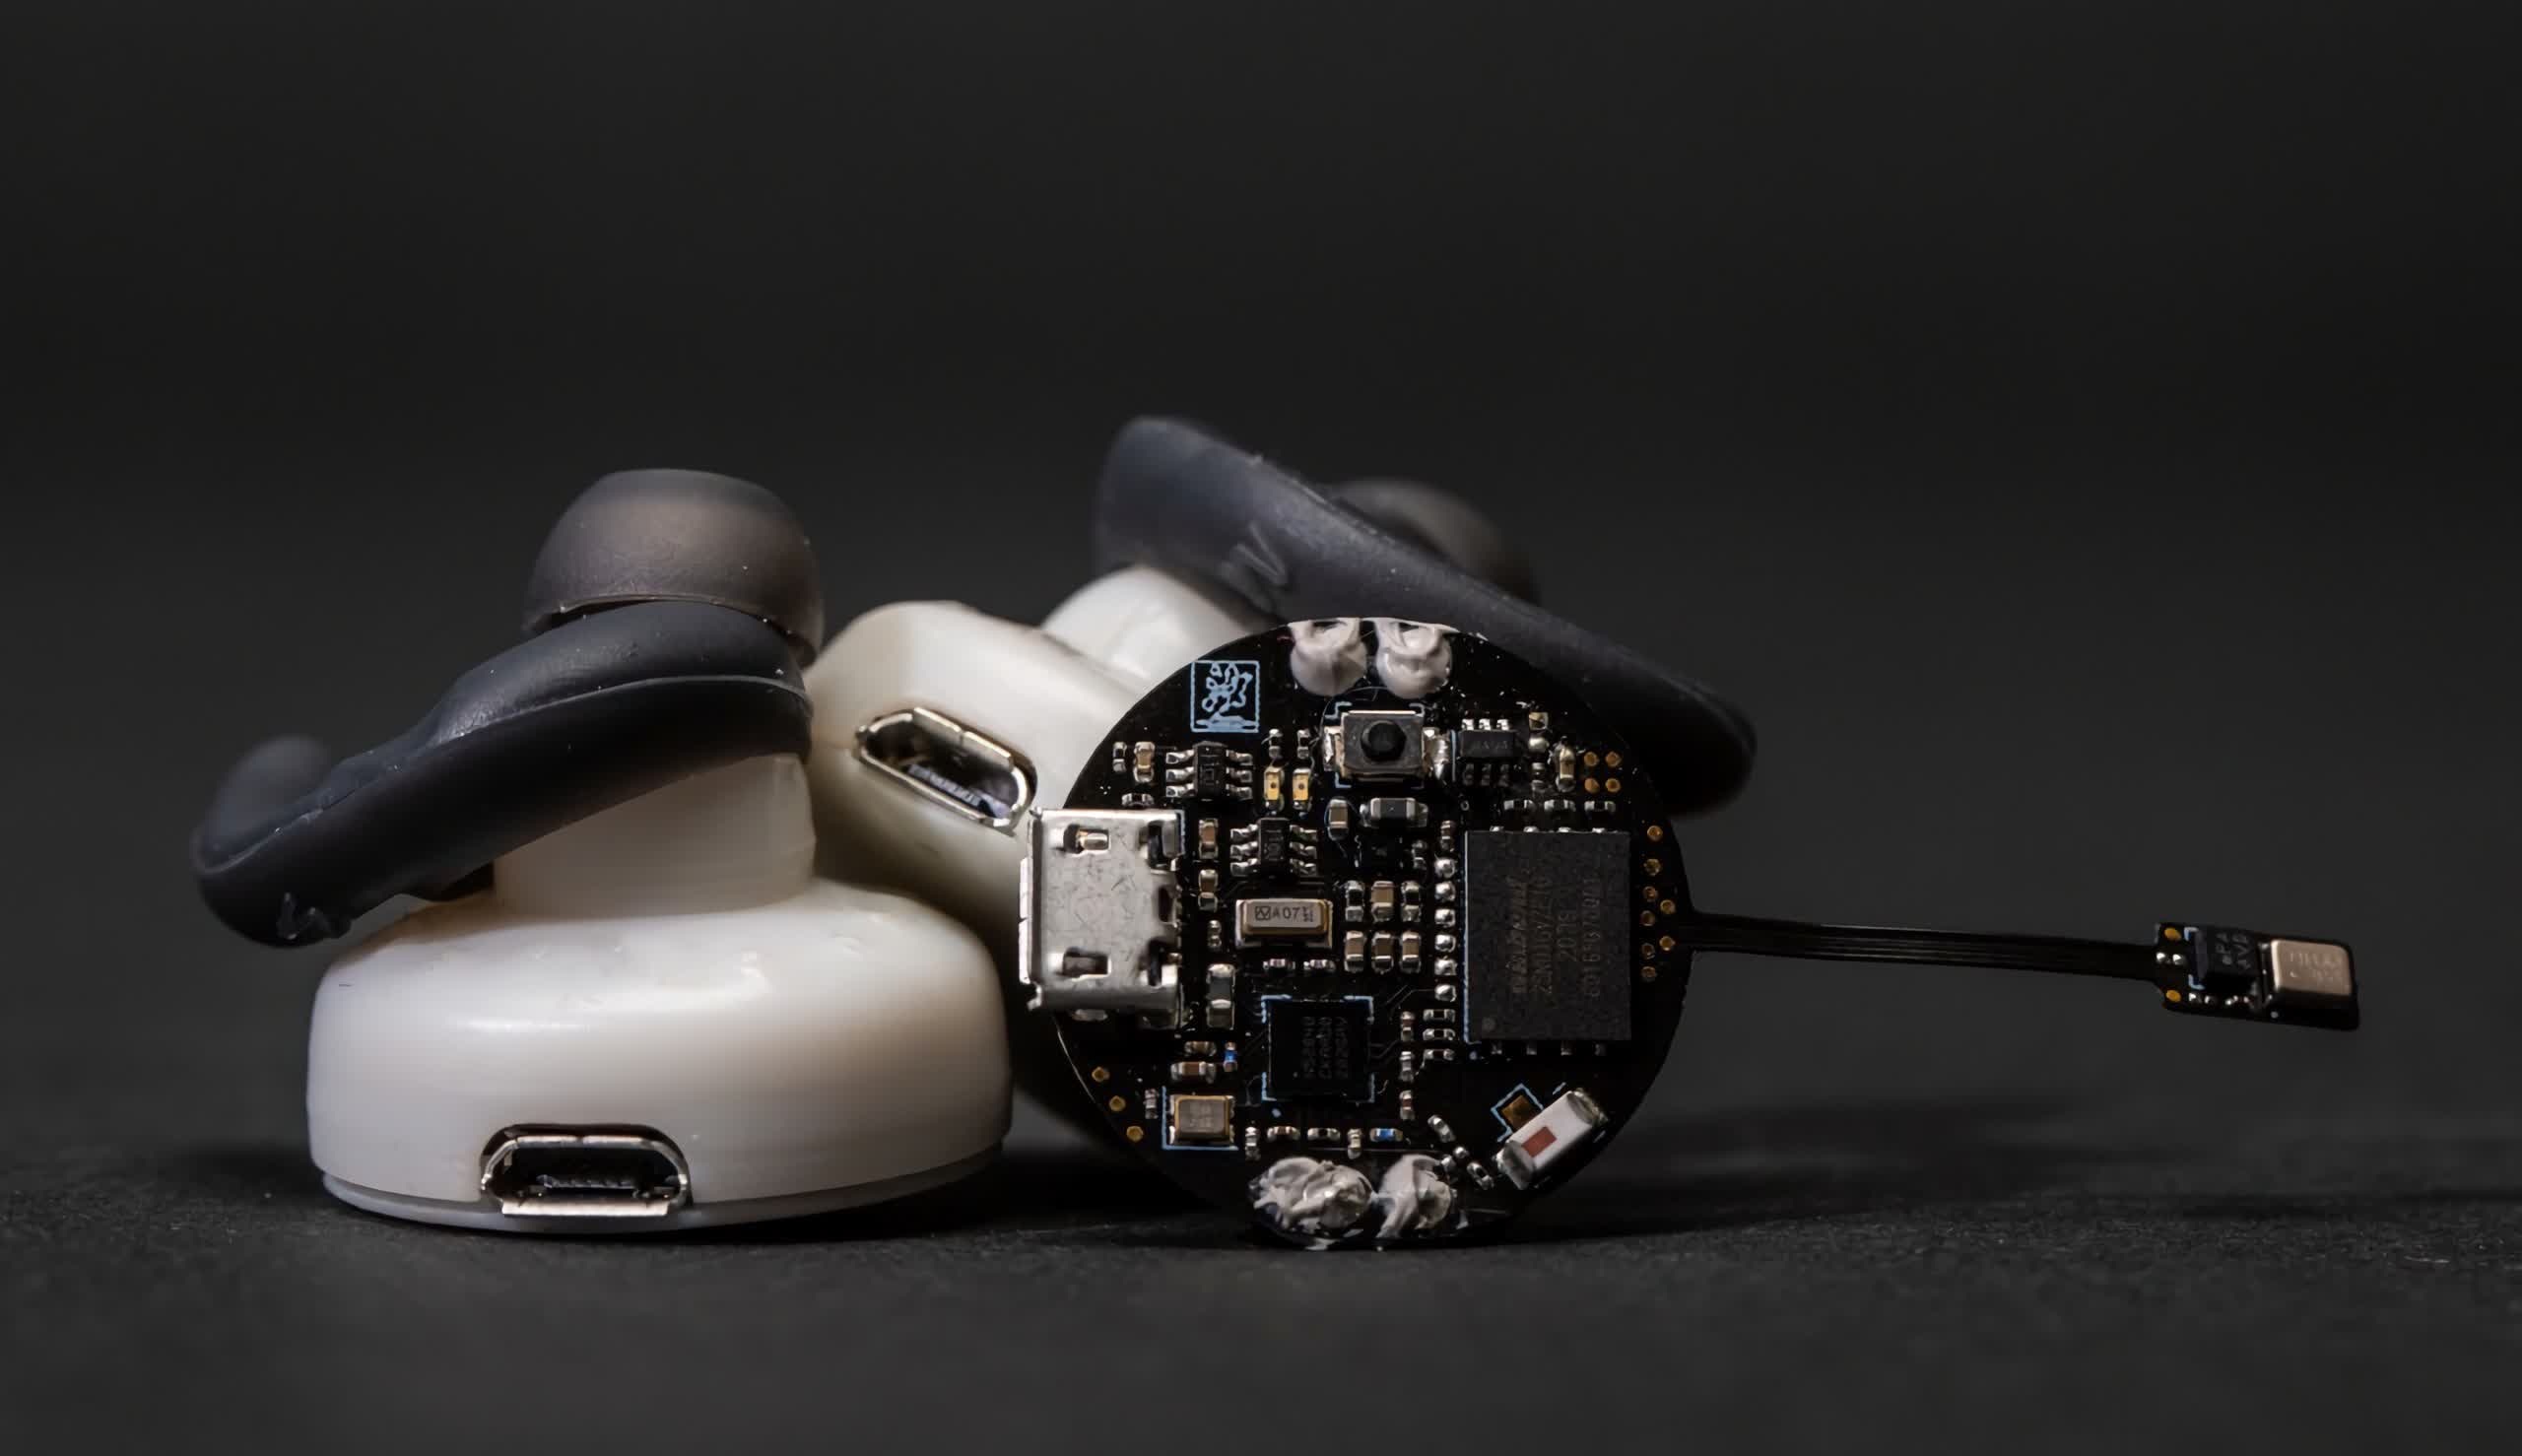 Engineering students develop noise-canceling earbuds powered by machine learning